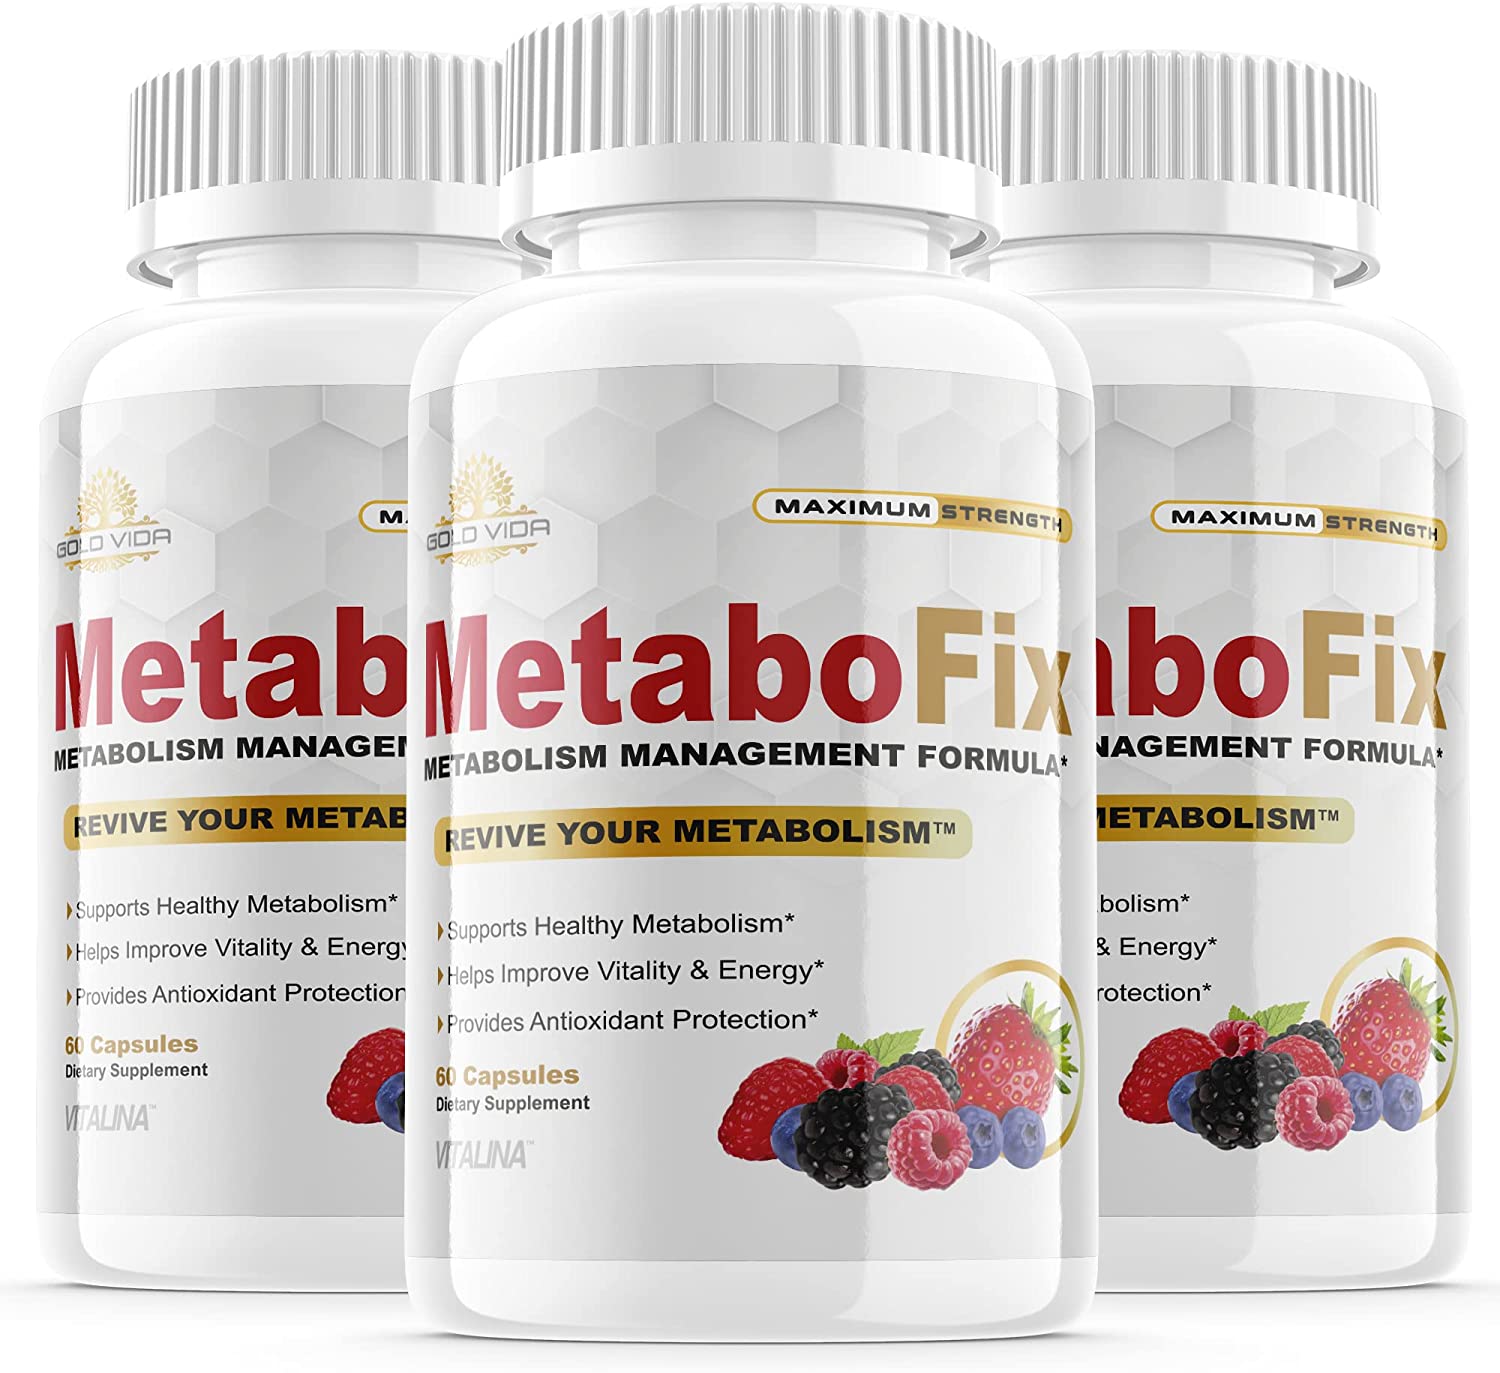 is metabofix fda-approved